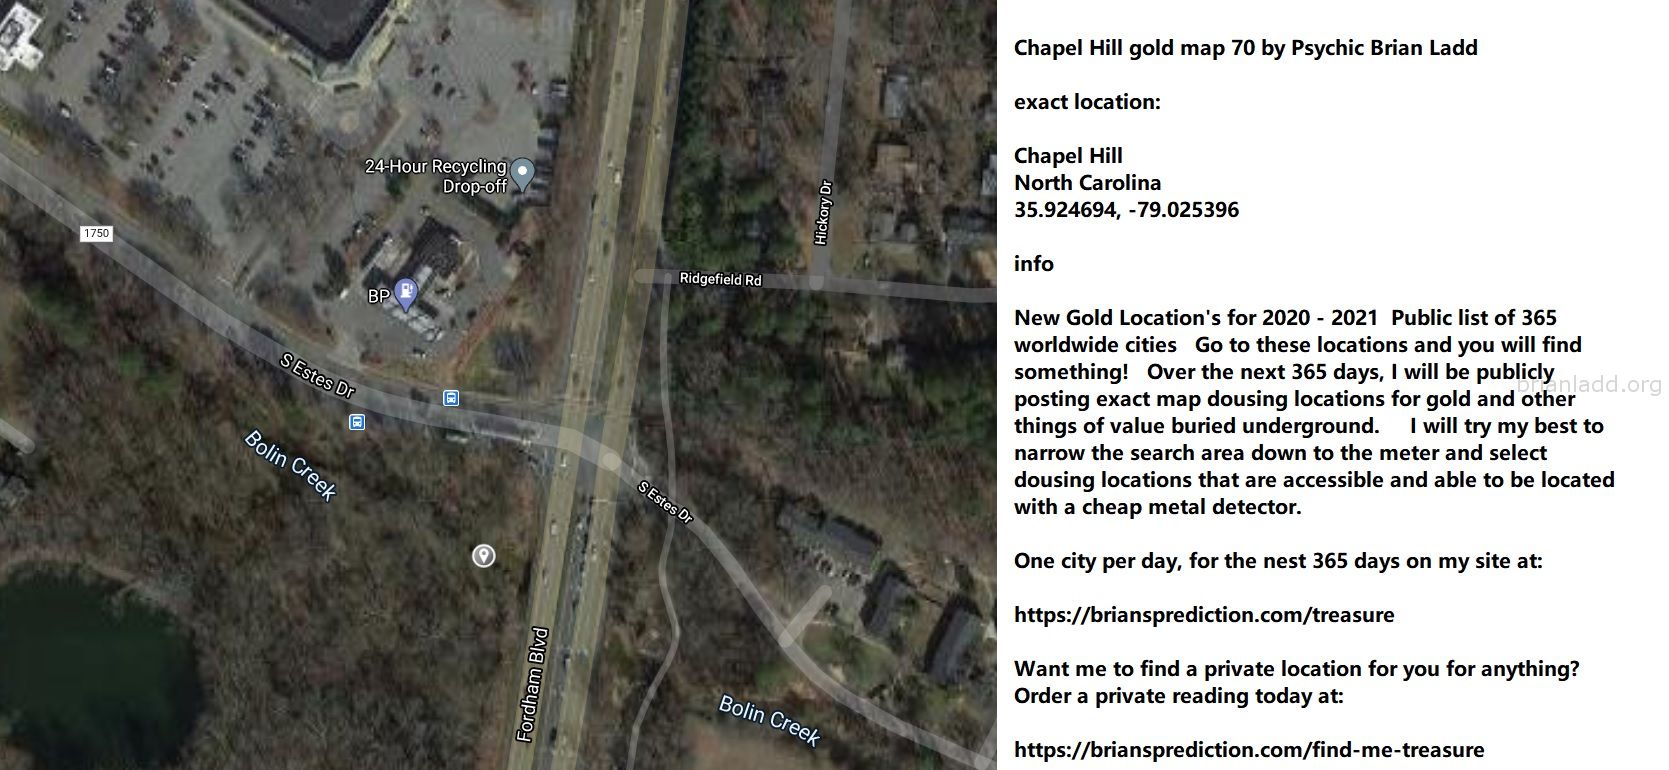 Chapel Hill Gold Map 70 By Psychic Brian Ladd - Chapel Hill Gold Map 70 By Psychic Brian Ladd  Exact Location:  Chapel H...
Chapel Hill Gold Map 70 By Psychic Brian Ladd  Exact Location:  Chapel Hill  North Carolina  35.924694, -79.025396  Info  New Gold Location'S For 2020 - 2021  Public List Of 365 Worldwide Cities  Go To These Locations And You Will Find Something!  Over The Next 365 Days, I Will Be Publicly Posting Exact Map Dousing Locations For Gold And Other Things Of Value Buried Underground.  I Will Try My Best To Narrow The Search Area Down To The Meter And Select Dousing Locations That Are Accessible And Able To Be Located With A Cheap Metal Detector.  One City Per Day, For The Nest 365 Days On My Site At:   https://briansprediction.com/Treasure  Want Me To Find A Private Location For You For Anything?  Order A Private Reading Today At:   https://briansprediction.com/Find-Me-Treasure
